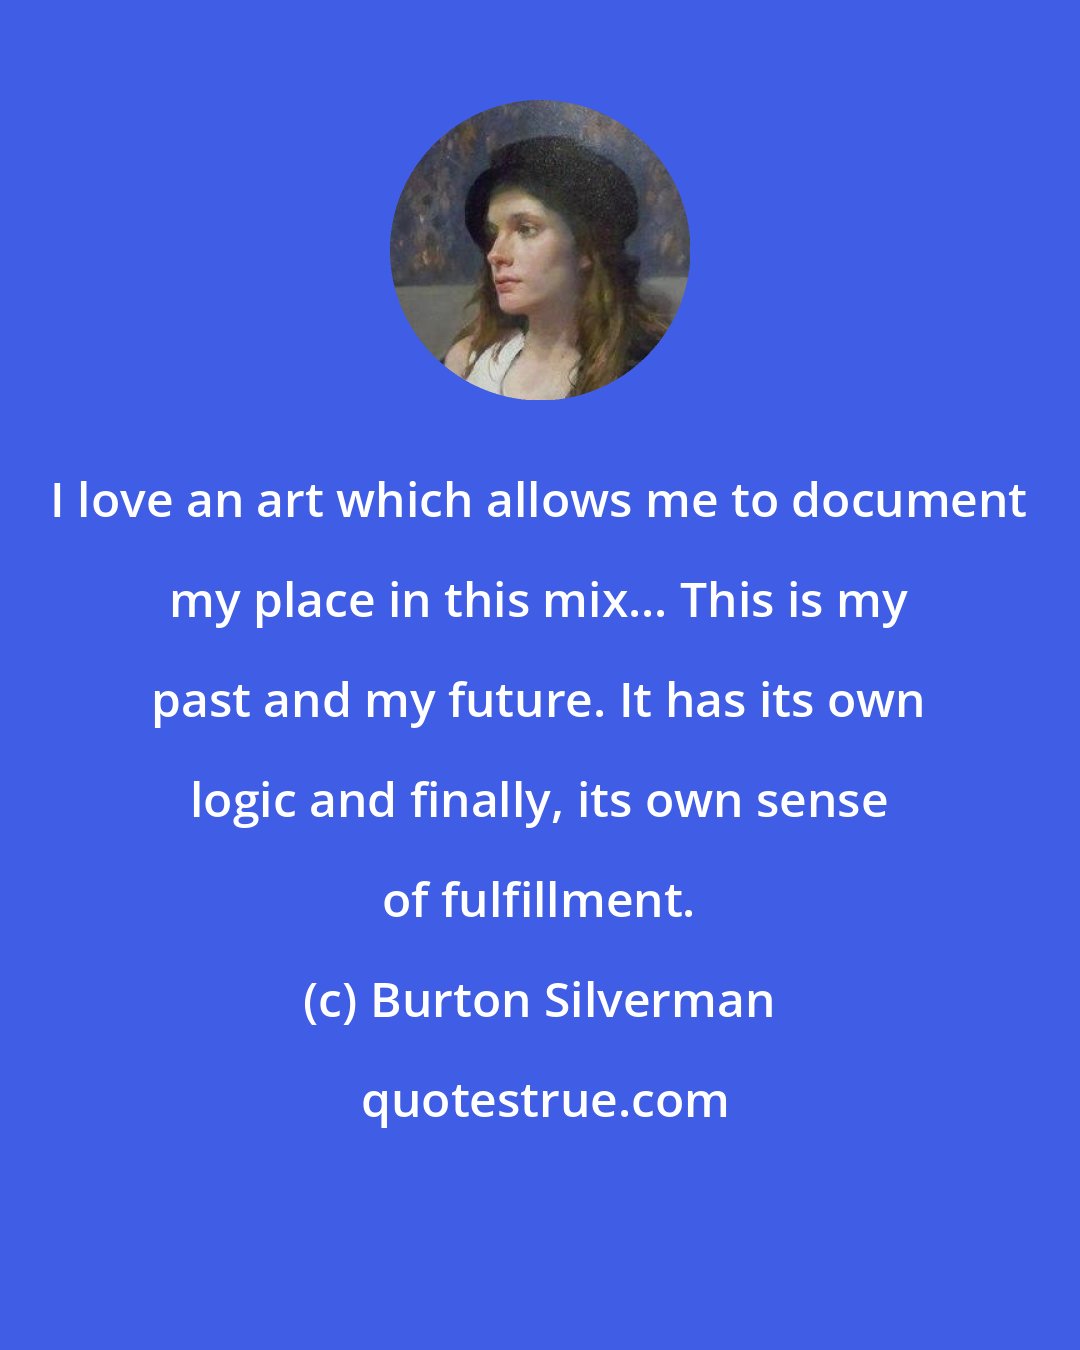 Burton Silverman: I love an art which allows me to document my place in this mix... This is my past and my future. It has its own logic and finally, its own sense of fulfillment.